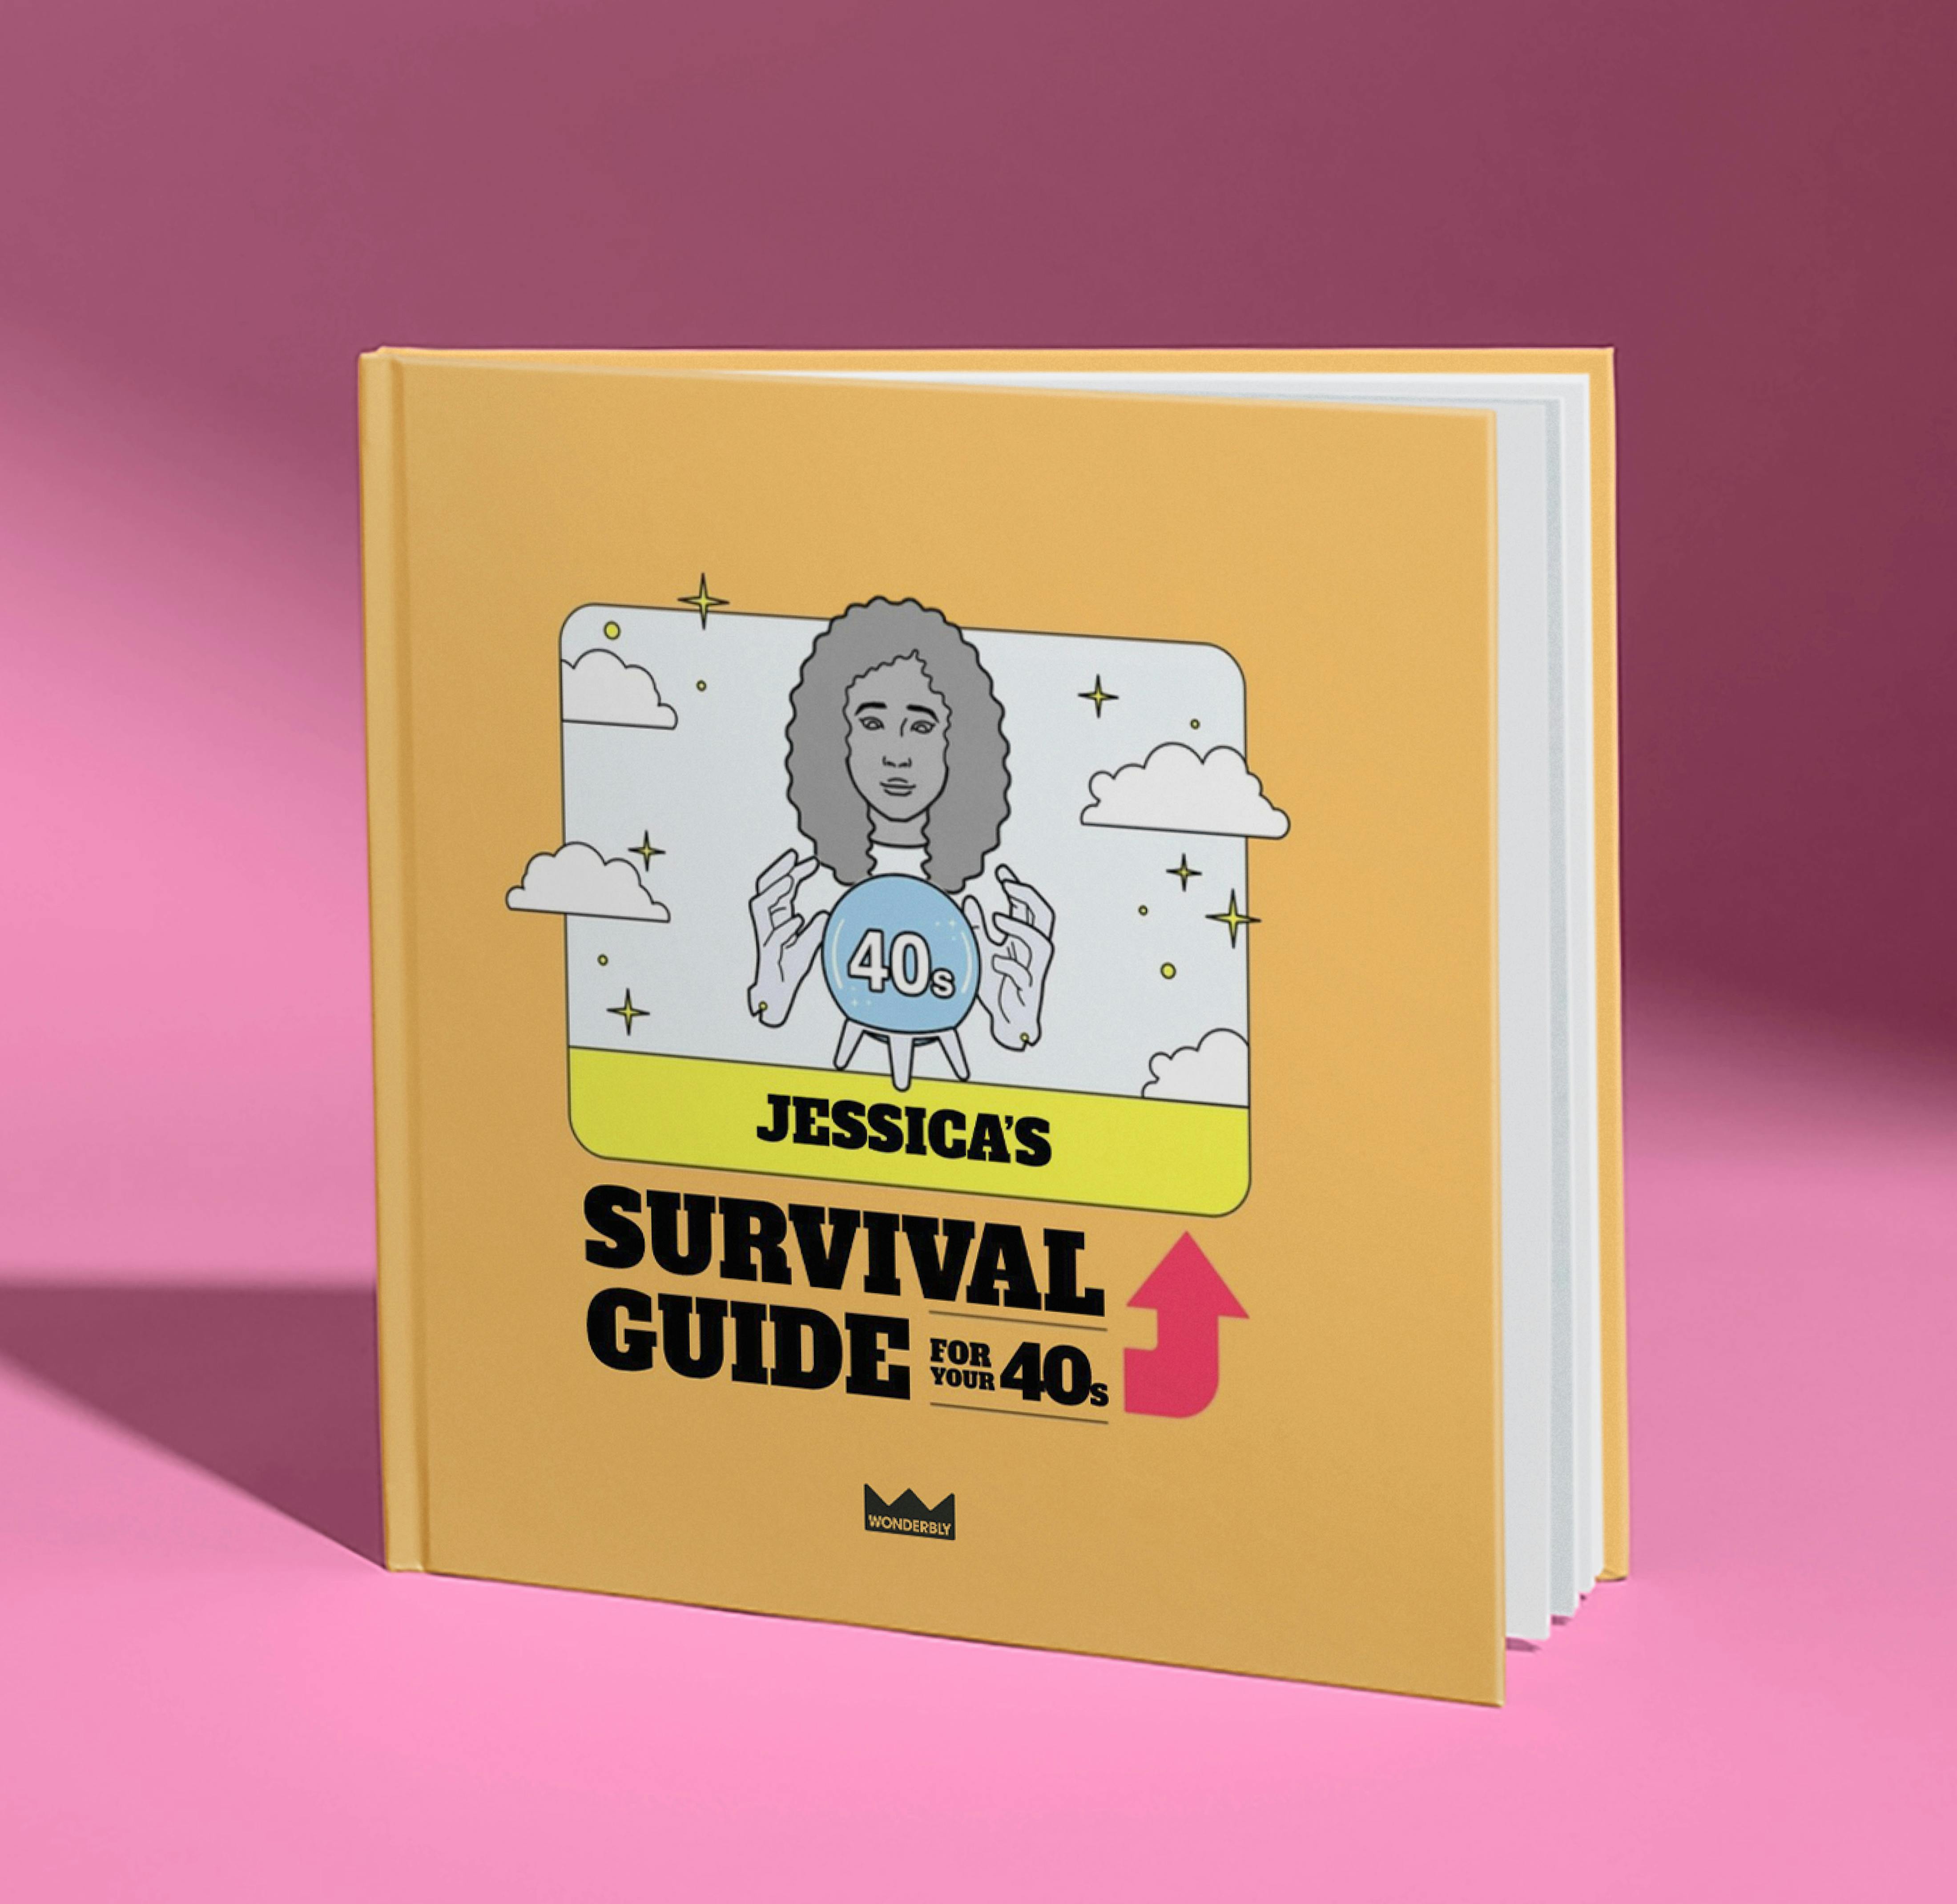 Example of a personalised cover for the Forties survival guide